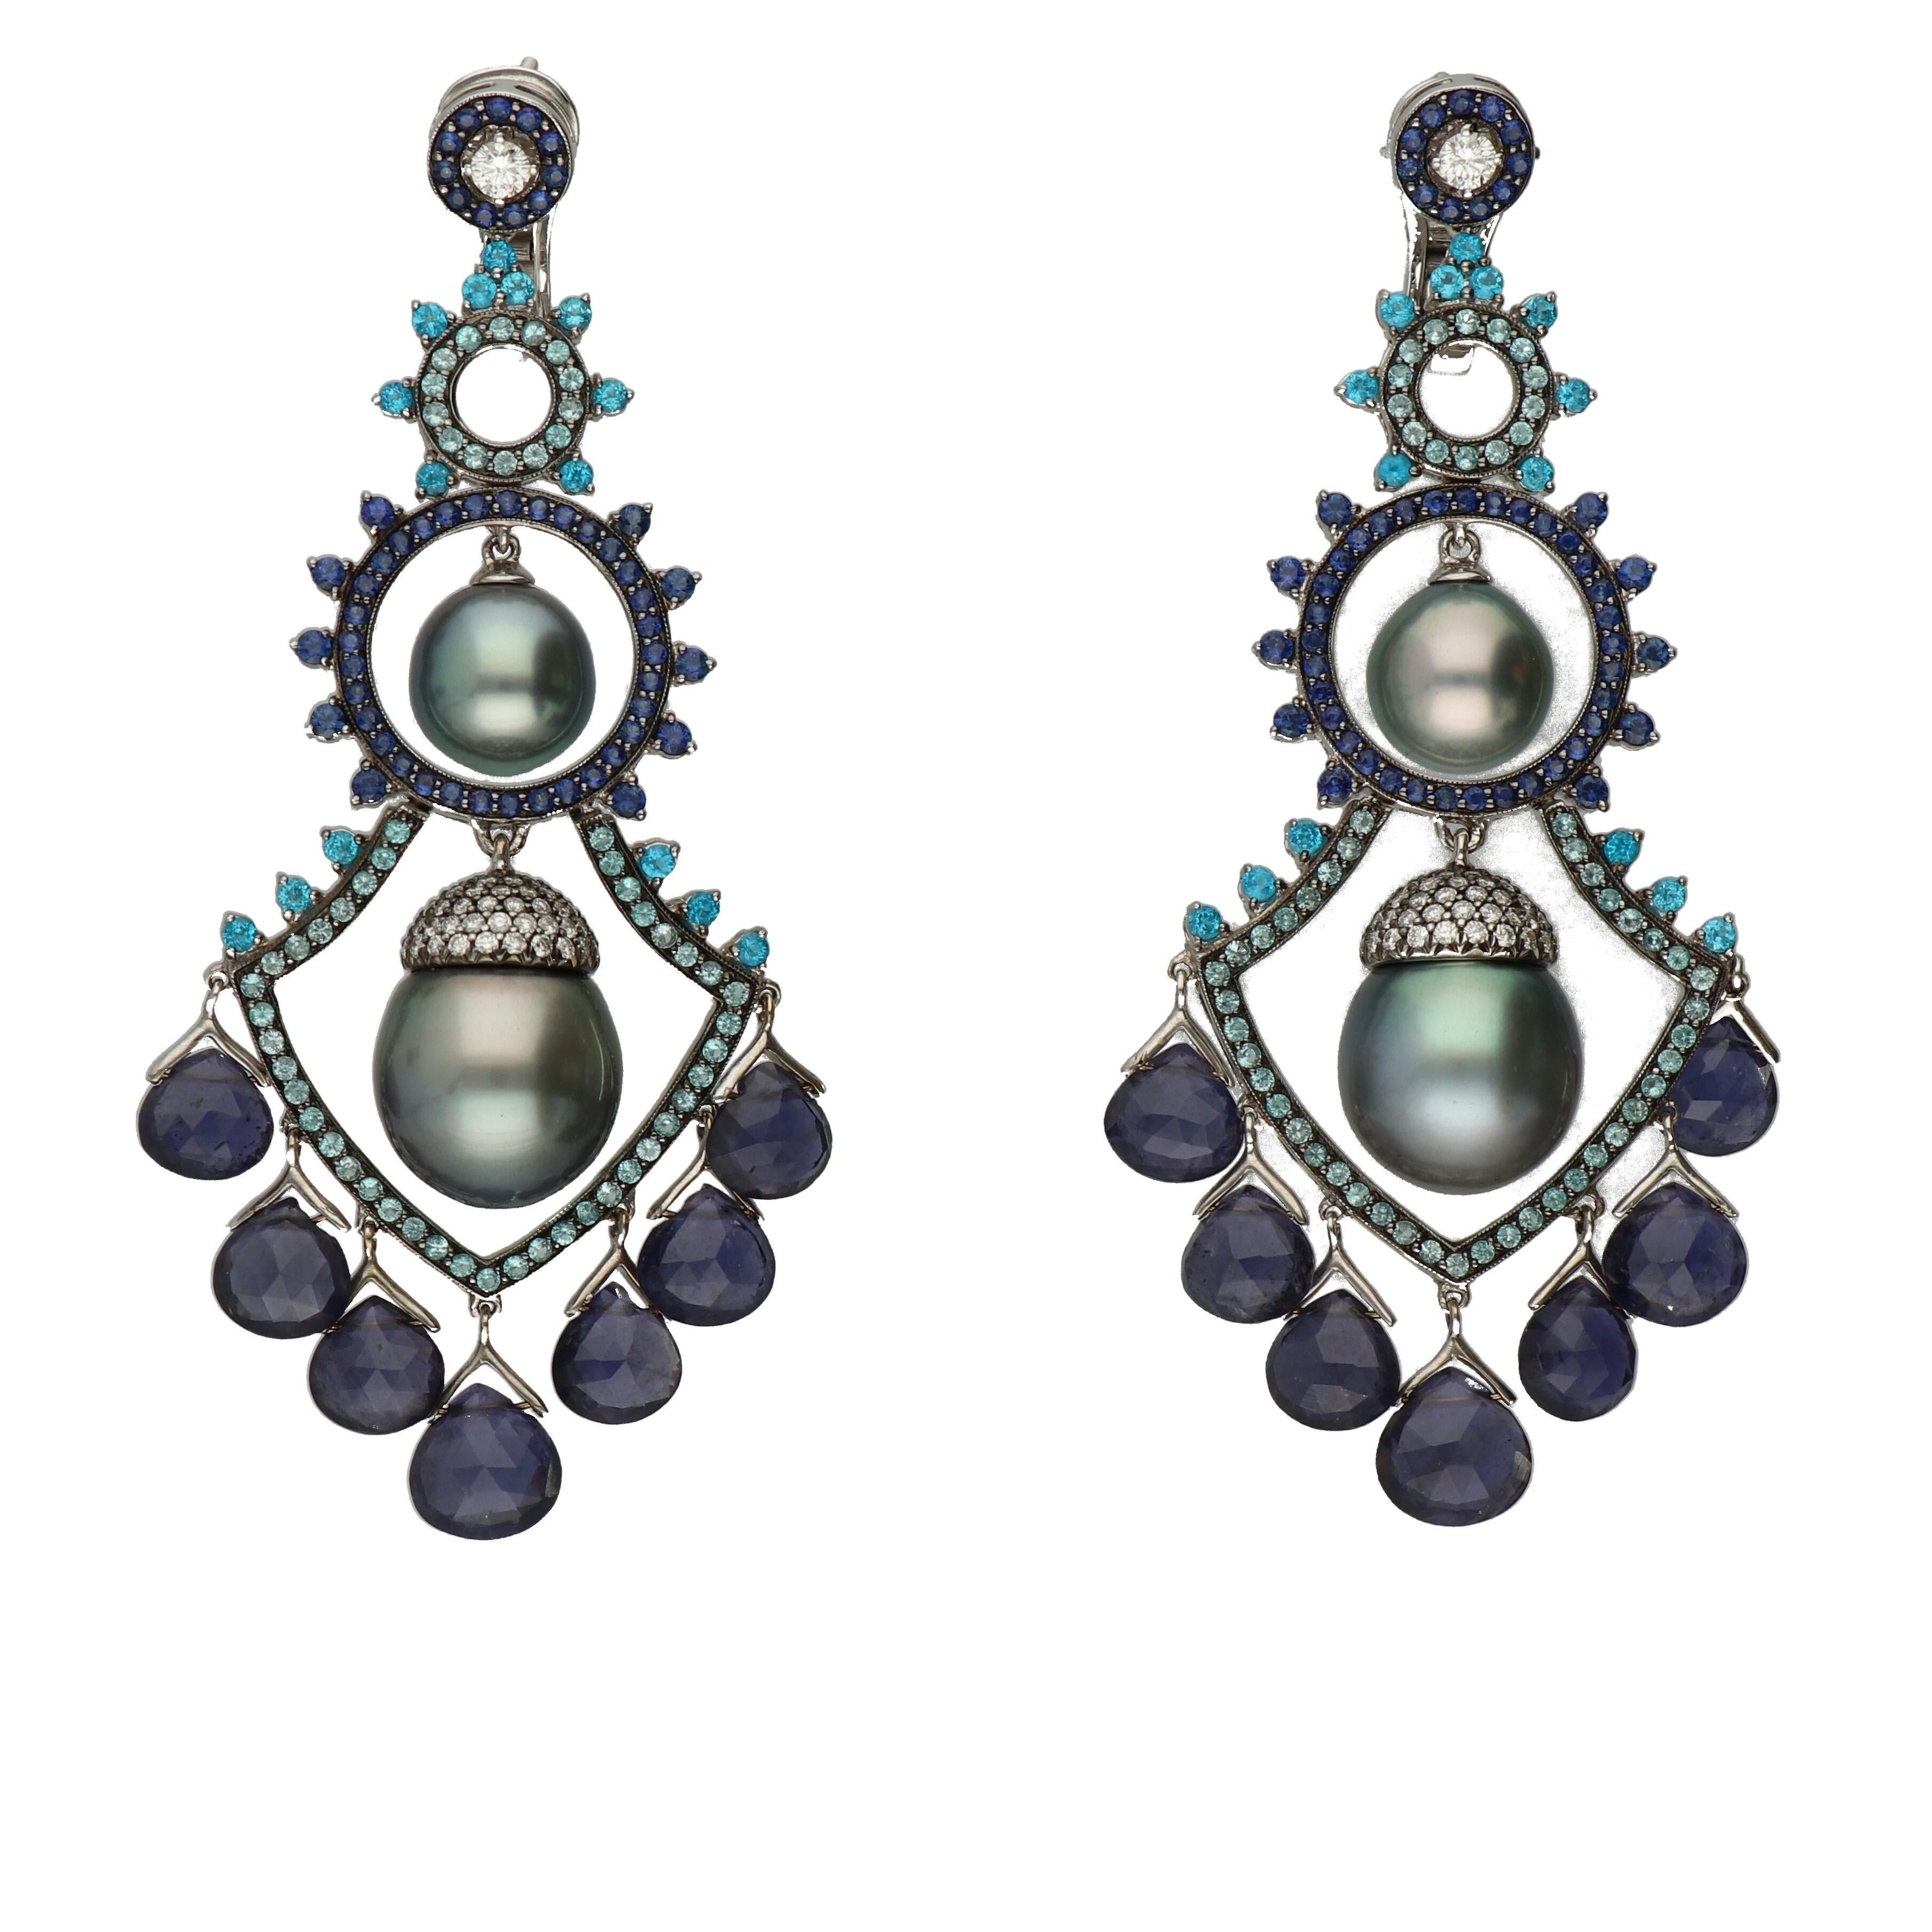 Autore 18K White Gold chandelier earrings with 4 Autore South Sea Cultured Pearls, grey, near round, 10 - 13 mm diameter, diamonds, blue sapphires, apatites, iolites and Paraiba tourmalines.

Pearl shine:II - Surface Blemishes: A / B1 - Pearl Grain: